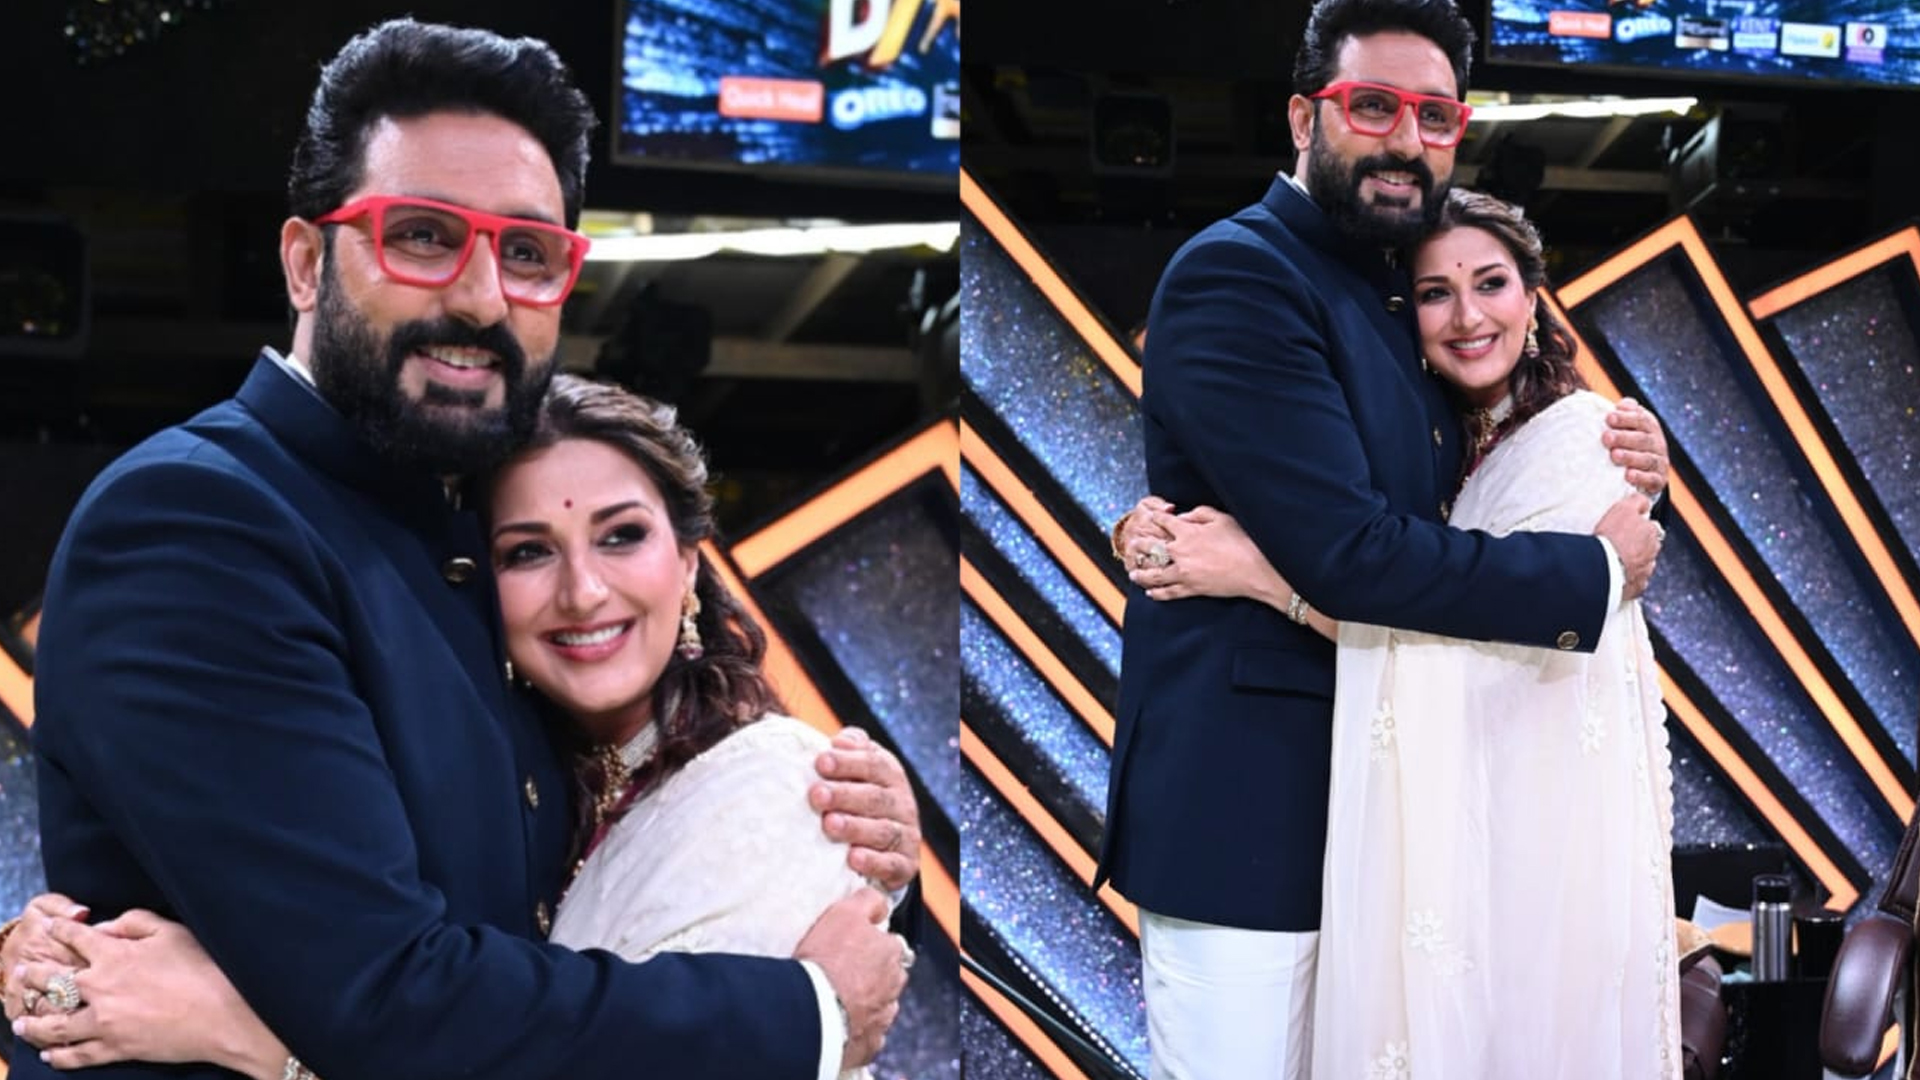 Did you know? On India’s Best Dancer 3, Abhishek Bachchan reveals he played a pivotal role in Sonali Bendre and Goldie Behl’s love story